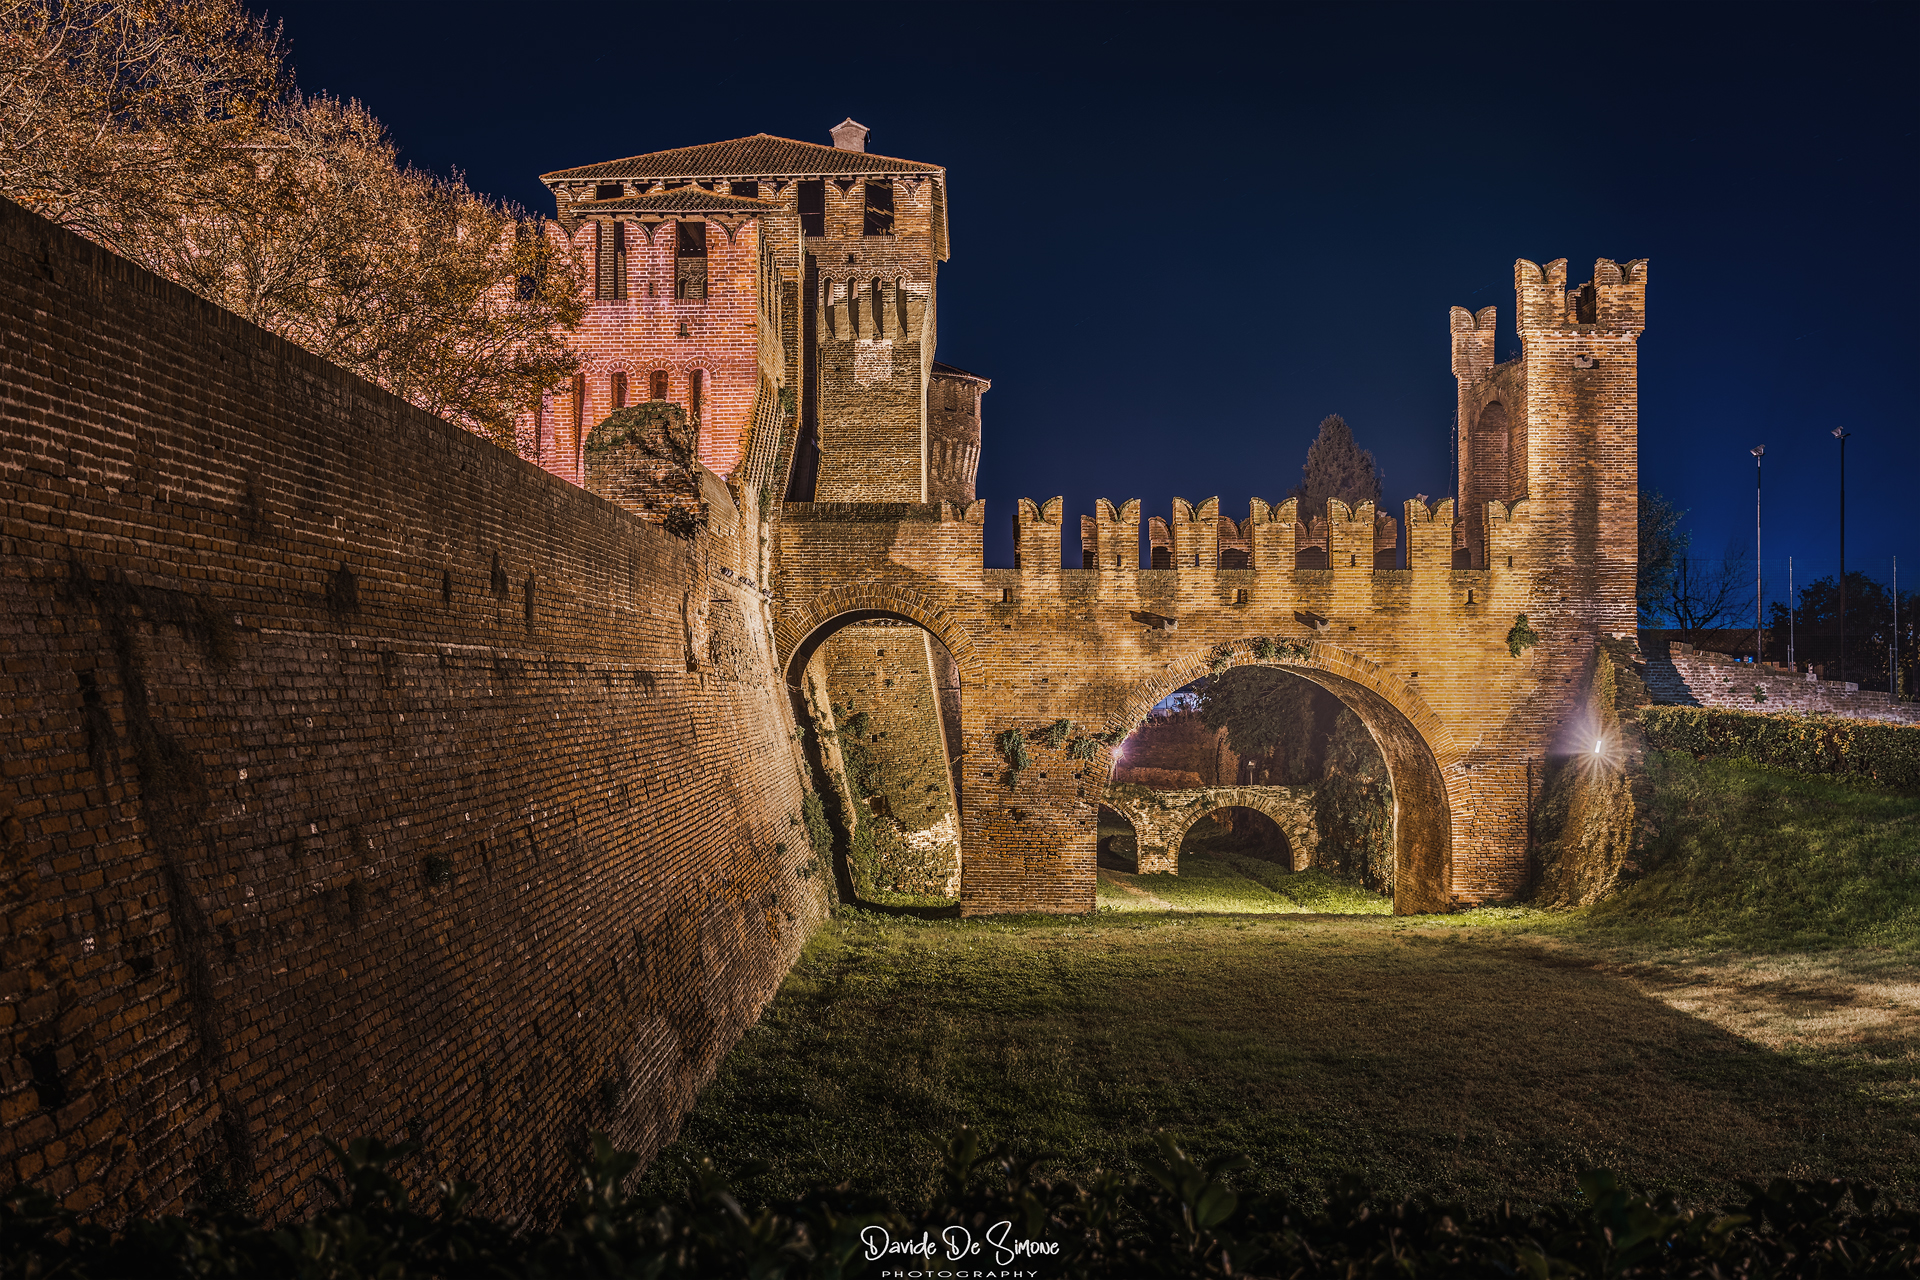 The Fortress of Soncino...